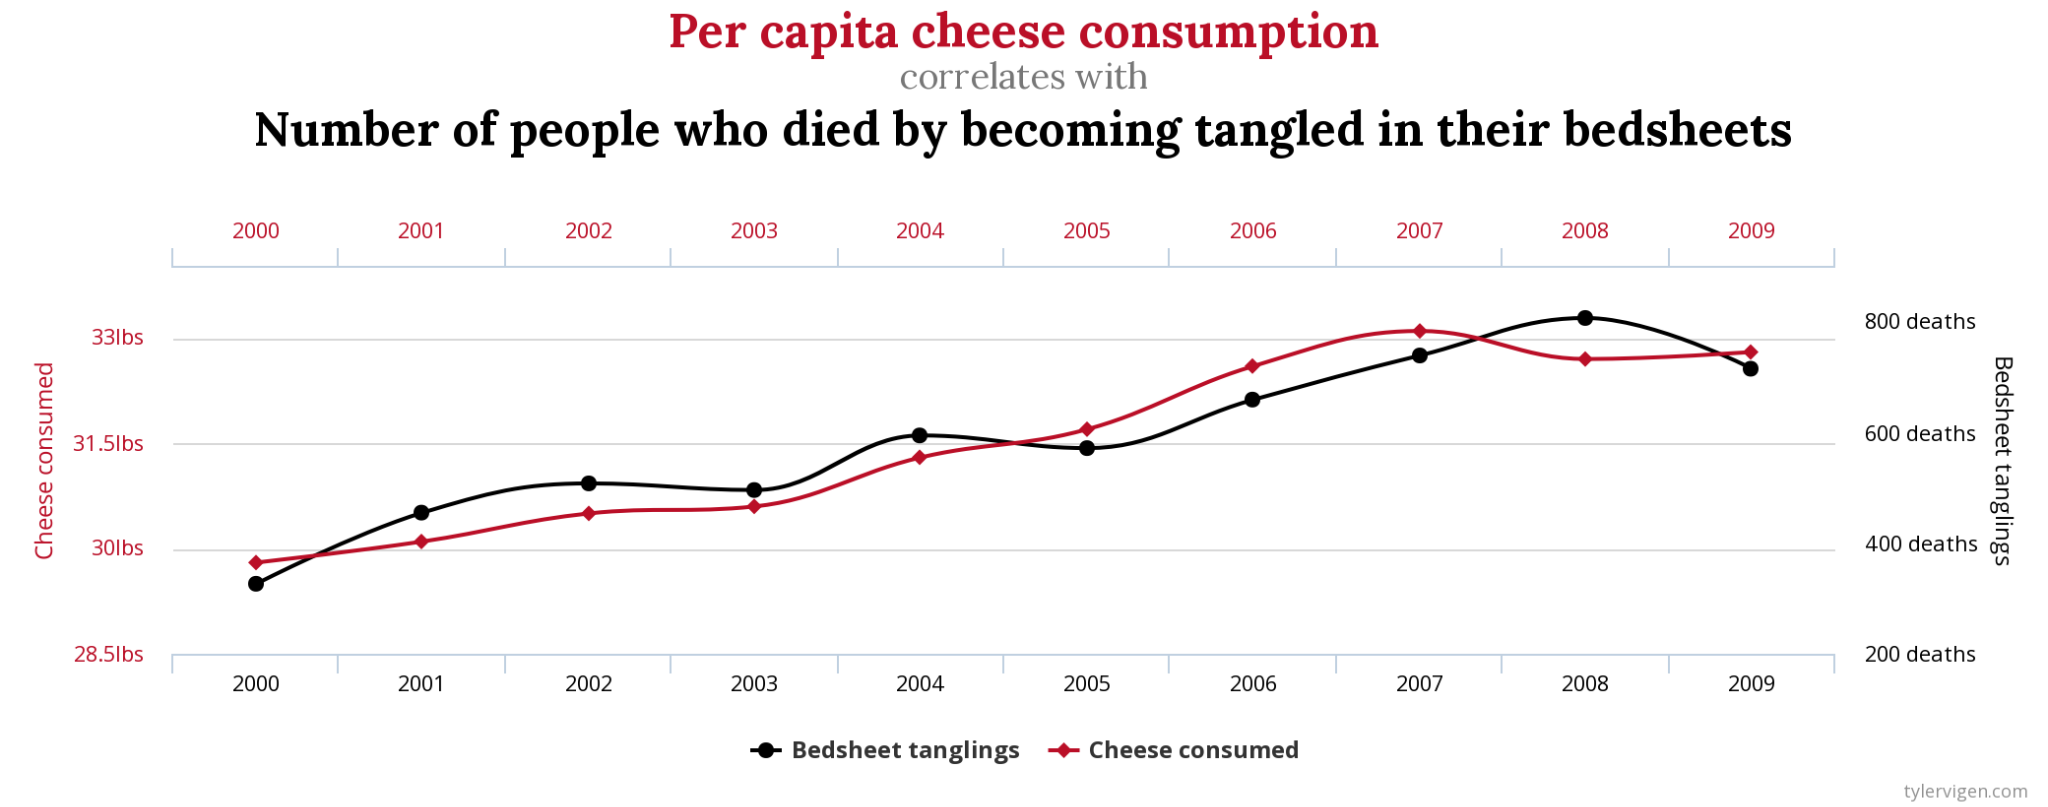 Chart depicting the strong correlations between “per capita cheese consumption” and “number of people who died by becoming tangled in their bedsheets.”